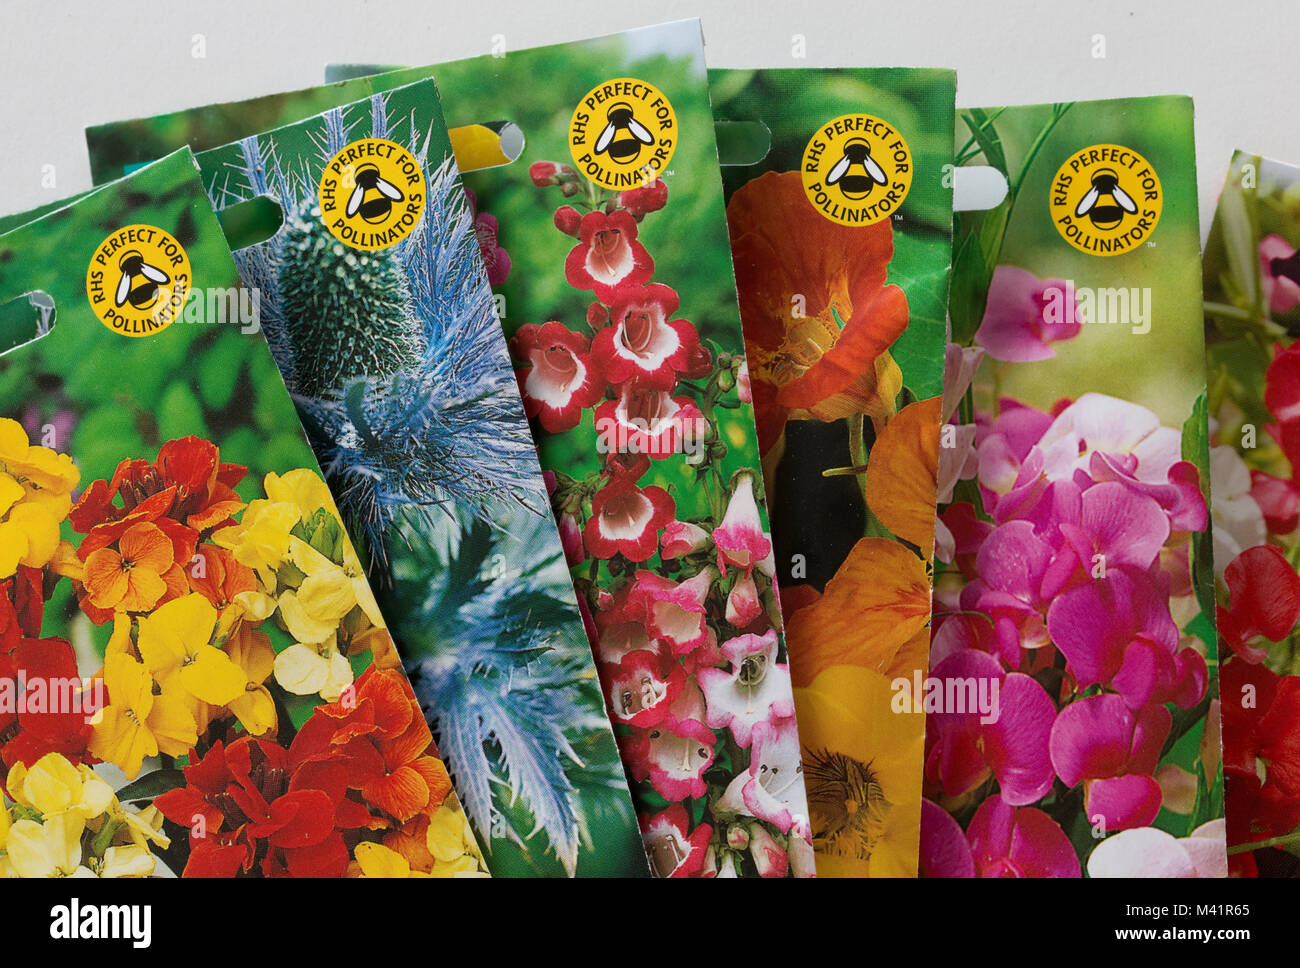 Colourful seed packets displaying RHS perfect for pollinators bee-friendly logo UK Stock Photo